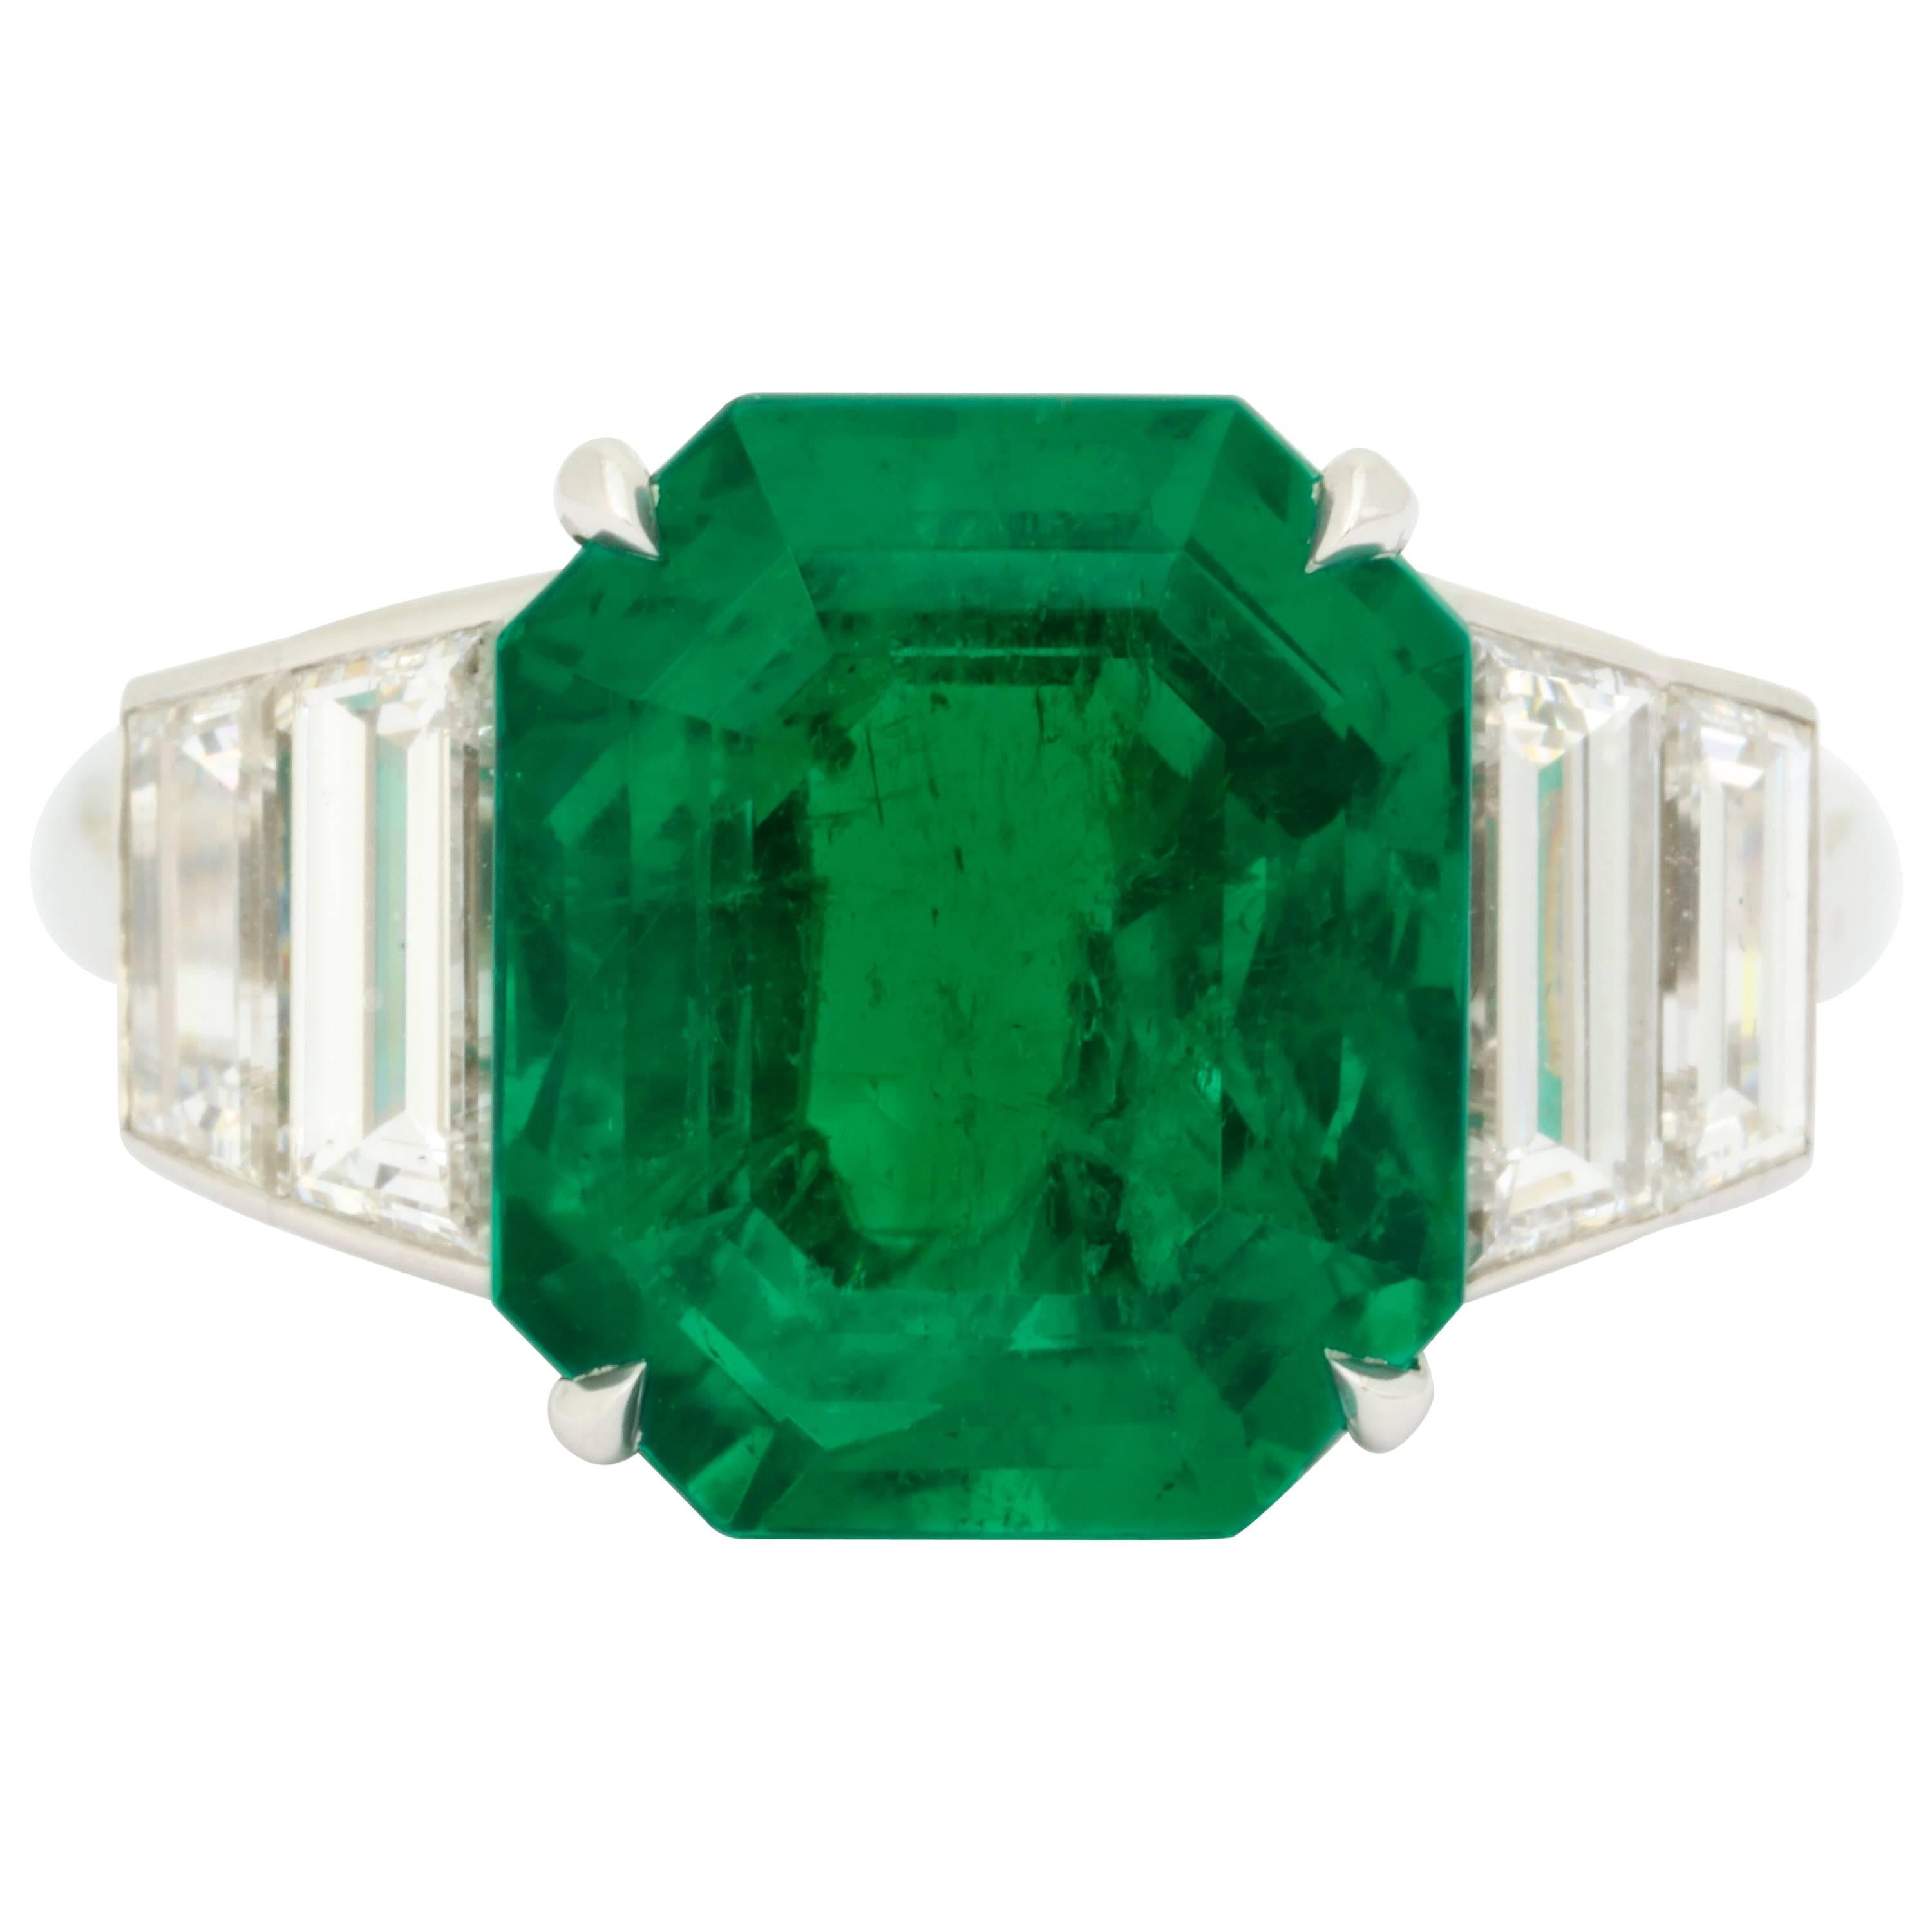 6.52 Carat Gem Quality Colombian Emerald Diamond Ring For Sale